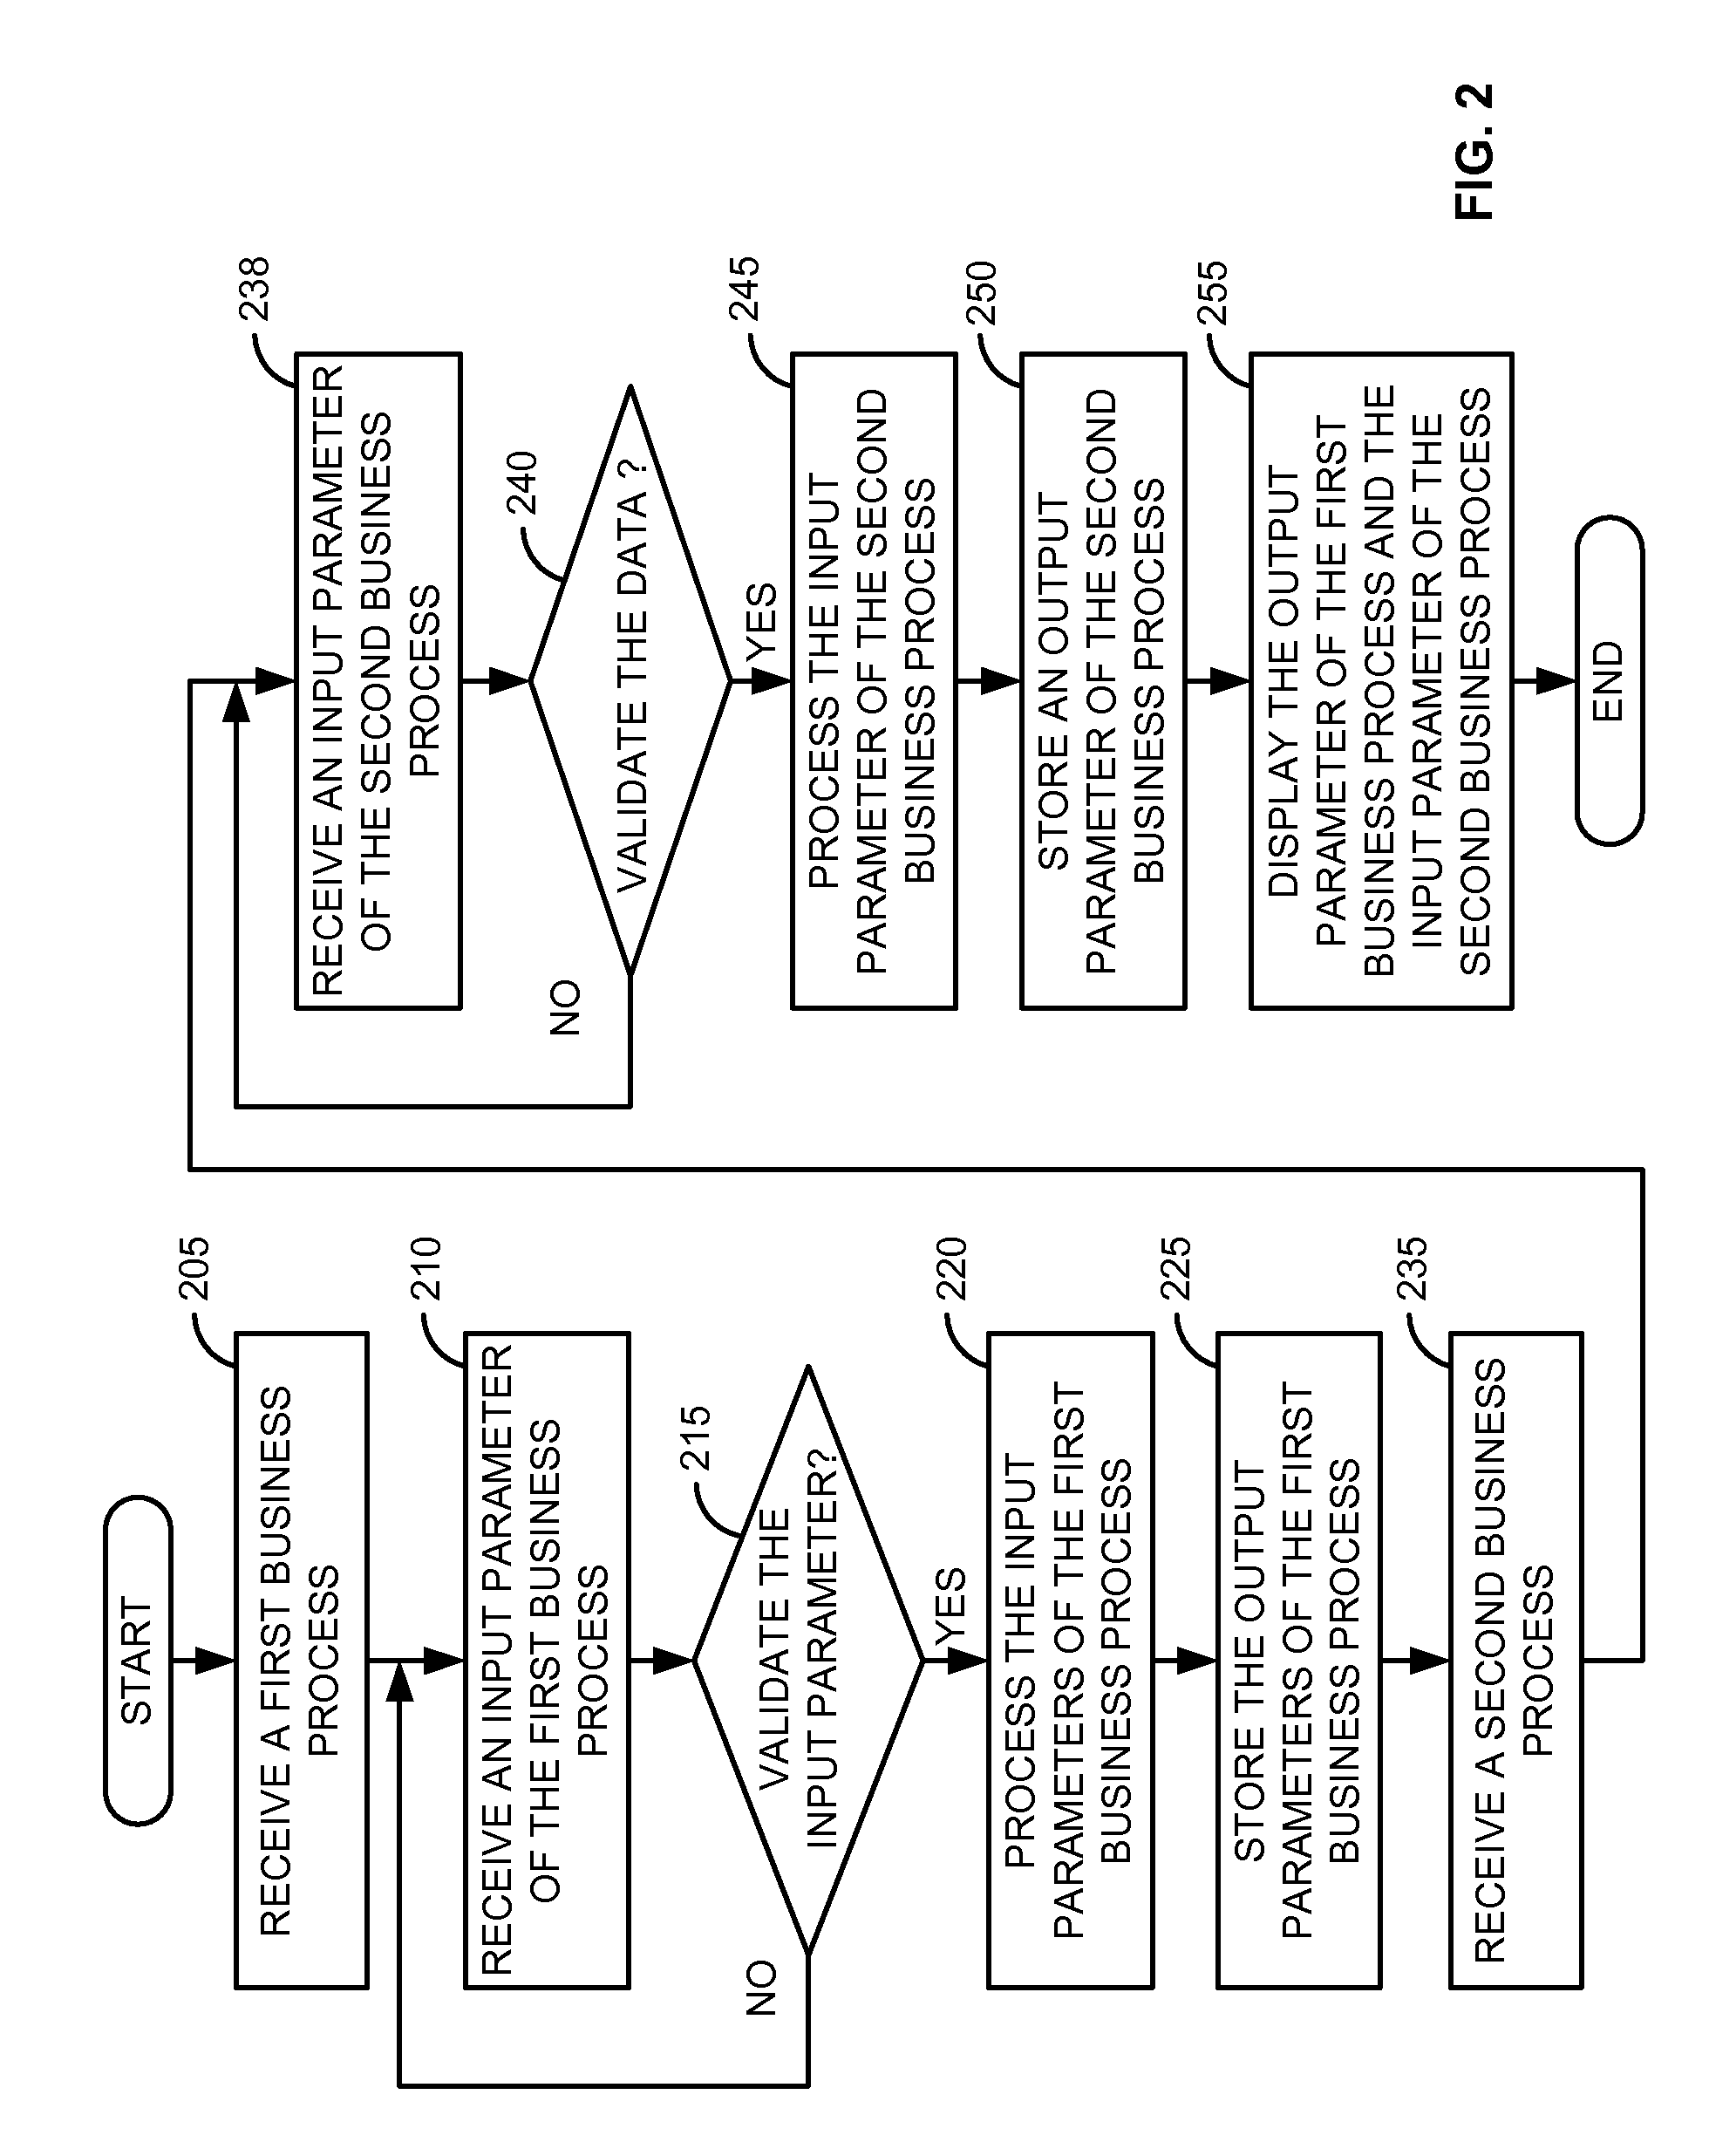 System and method for dynamic linking of business processes